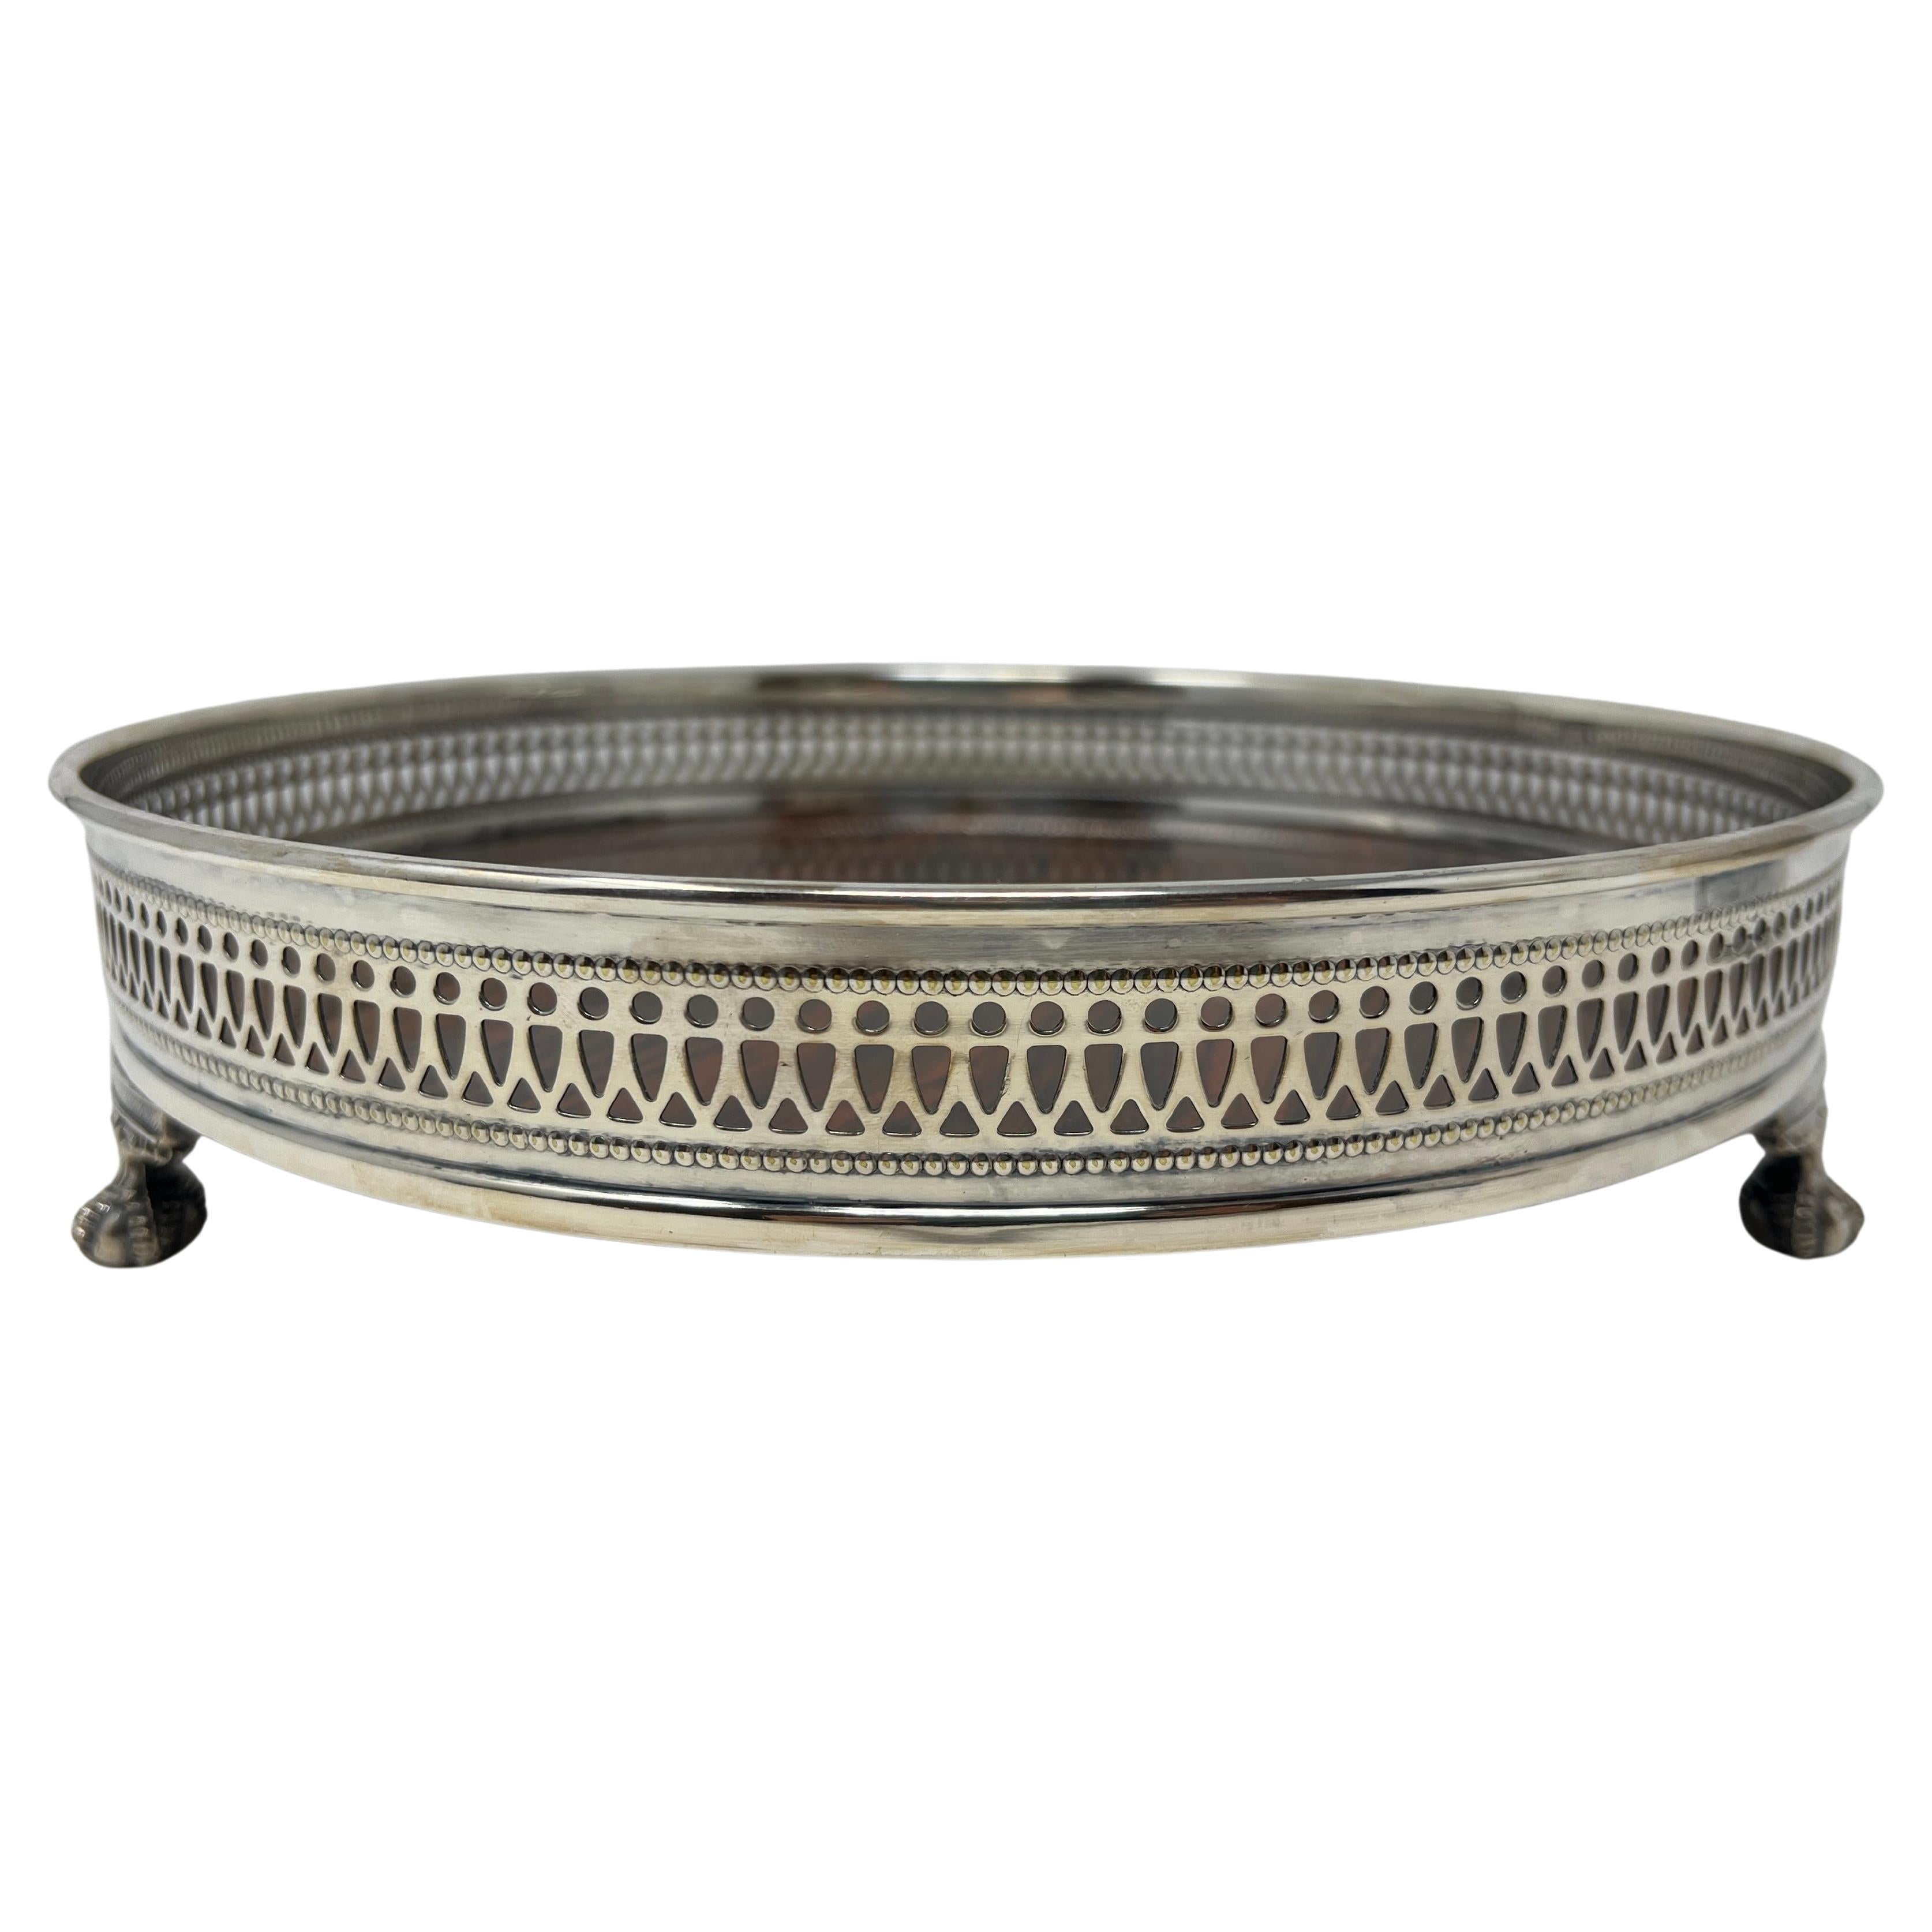 Estate English Silver-Plate Footed Galleried Tray, Circa 1950er-1960er Jahre.